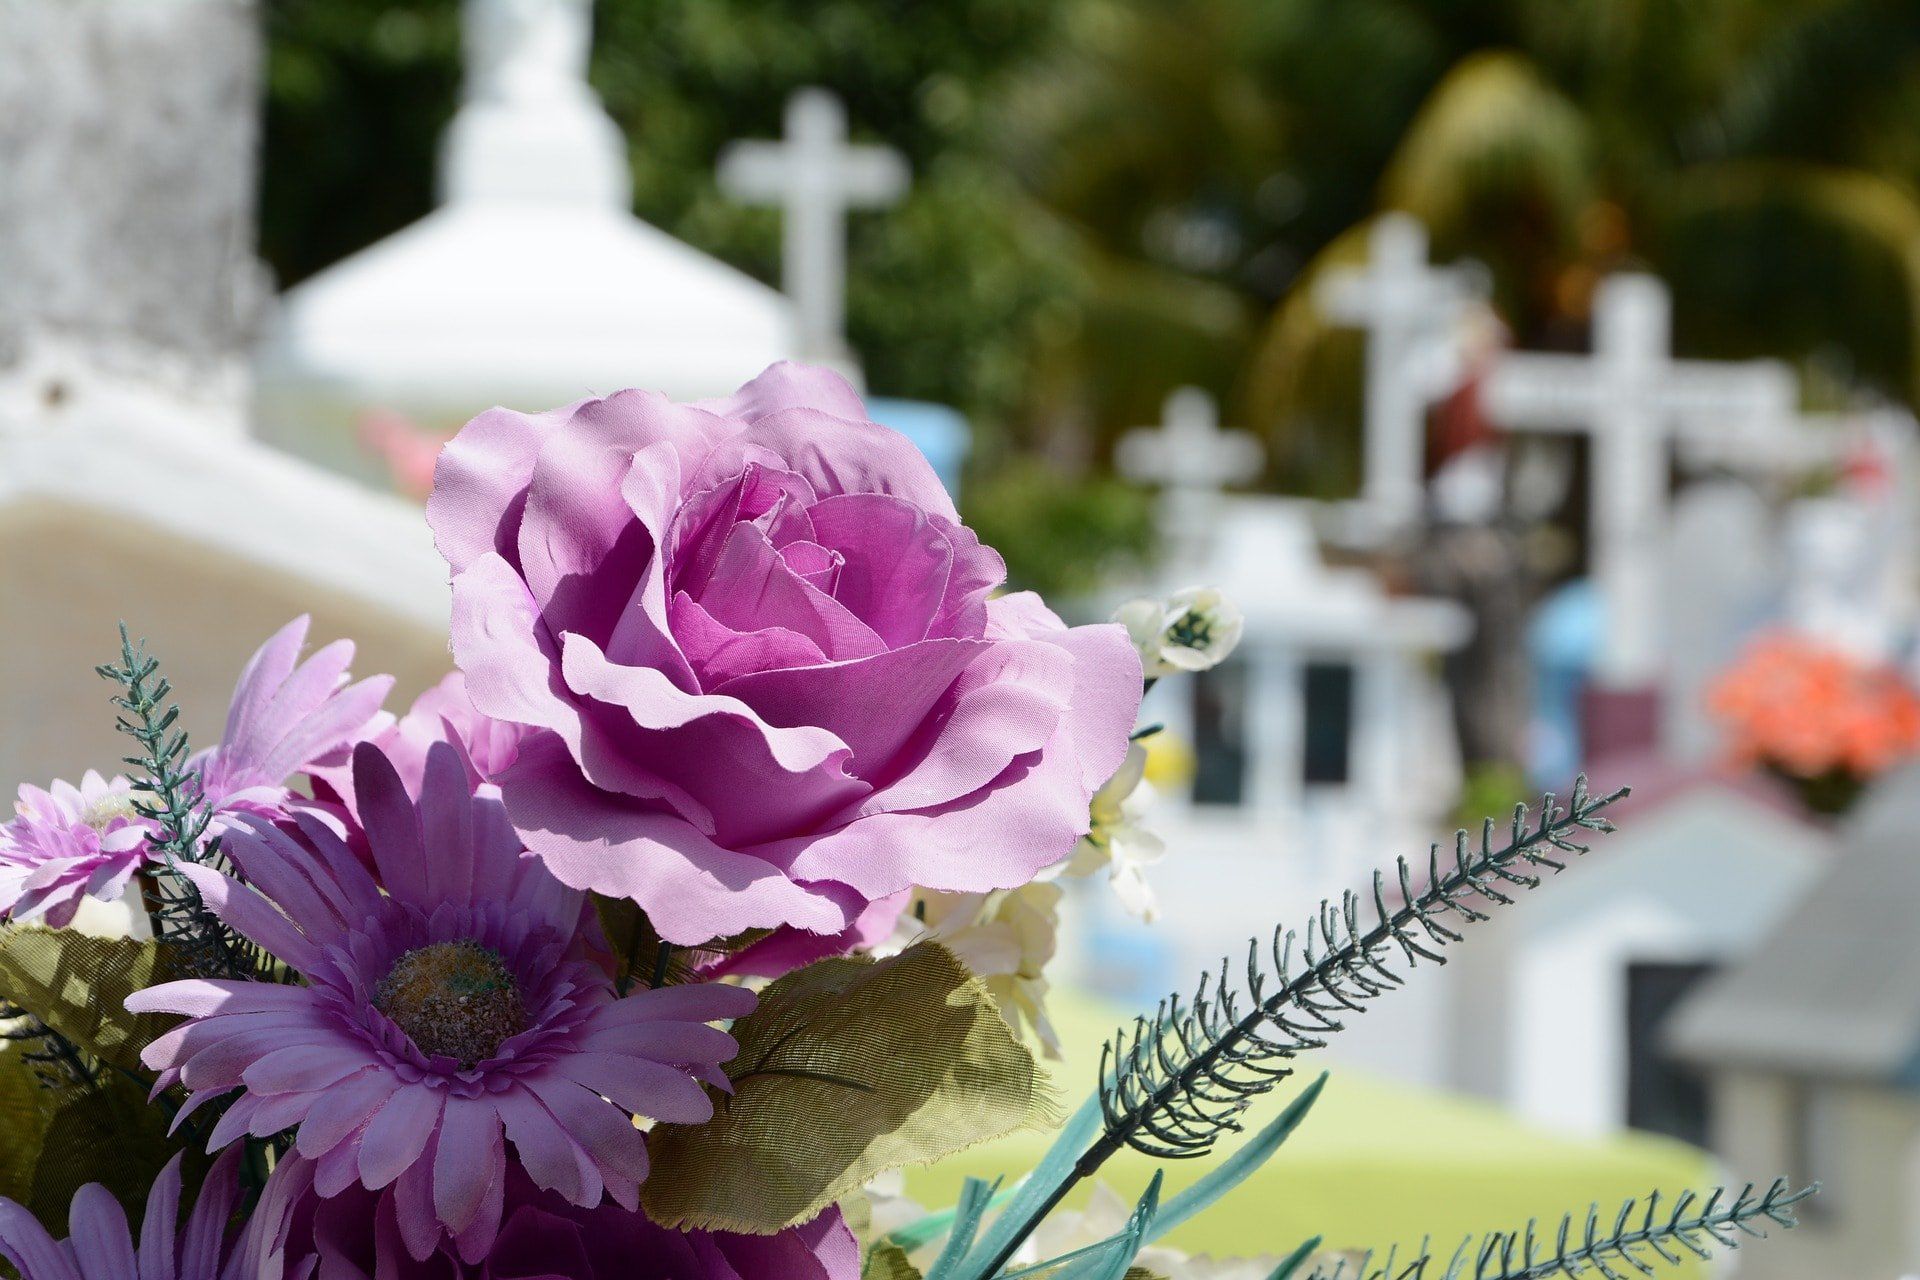 planning a graveside cremation service